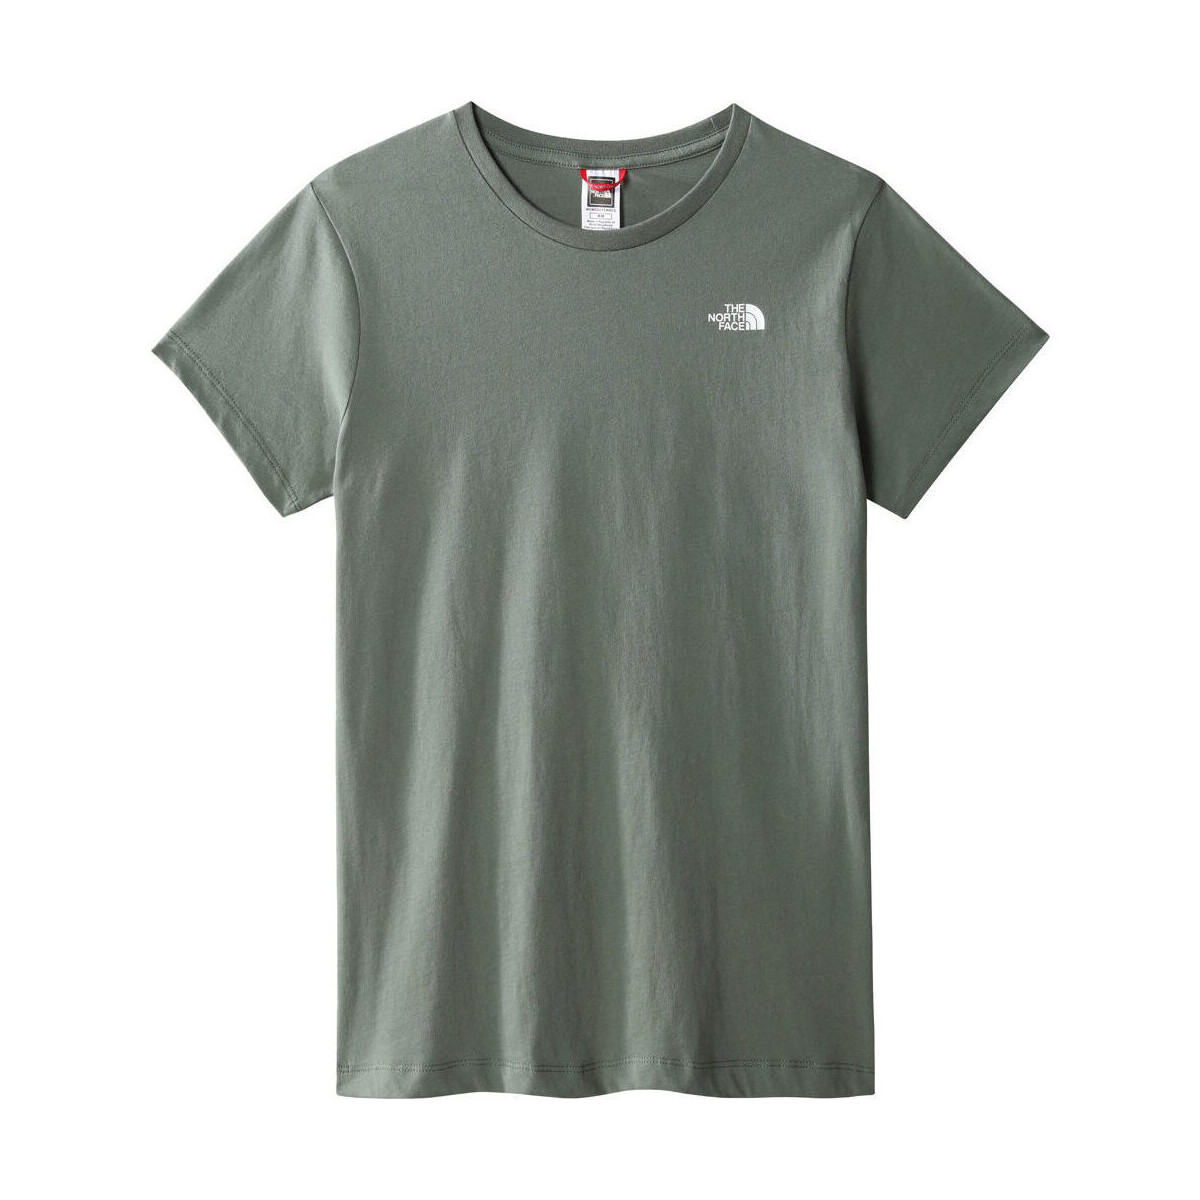 textil Mujer Camisas The North Face W S/S SIMPLE DOME TEE Verde